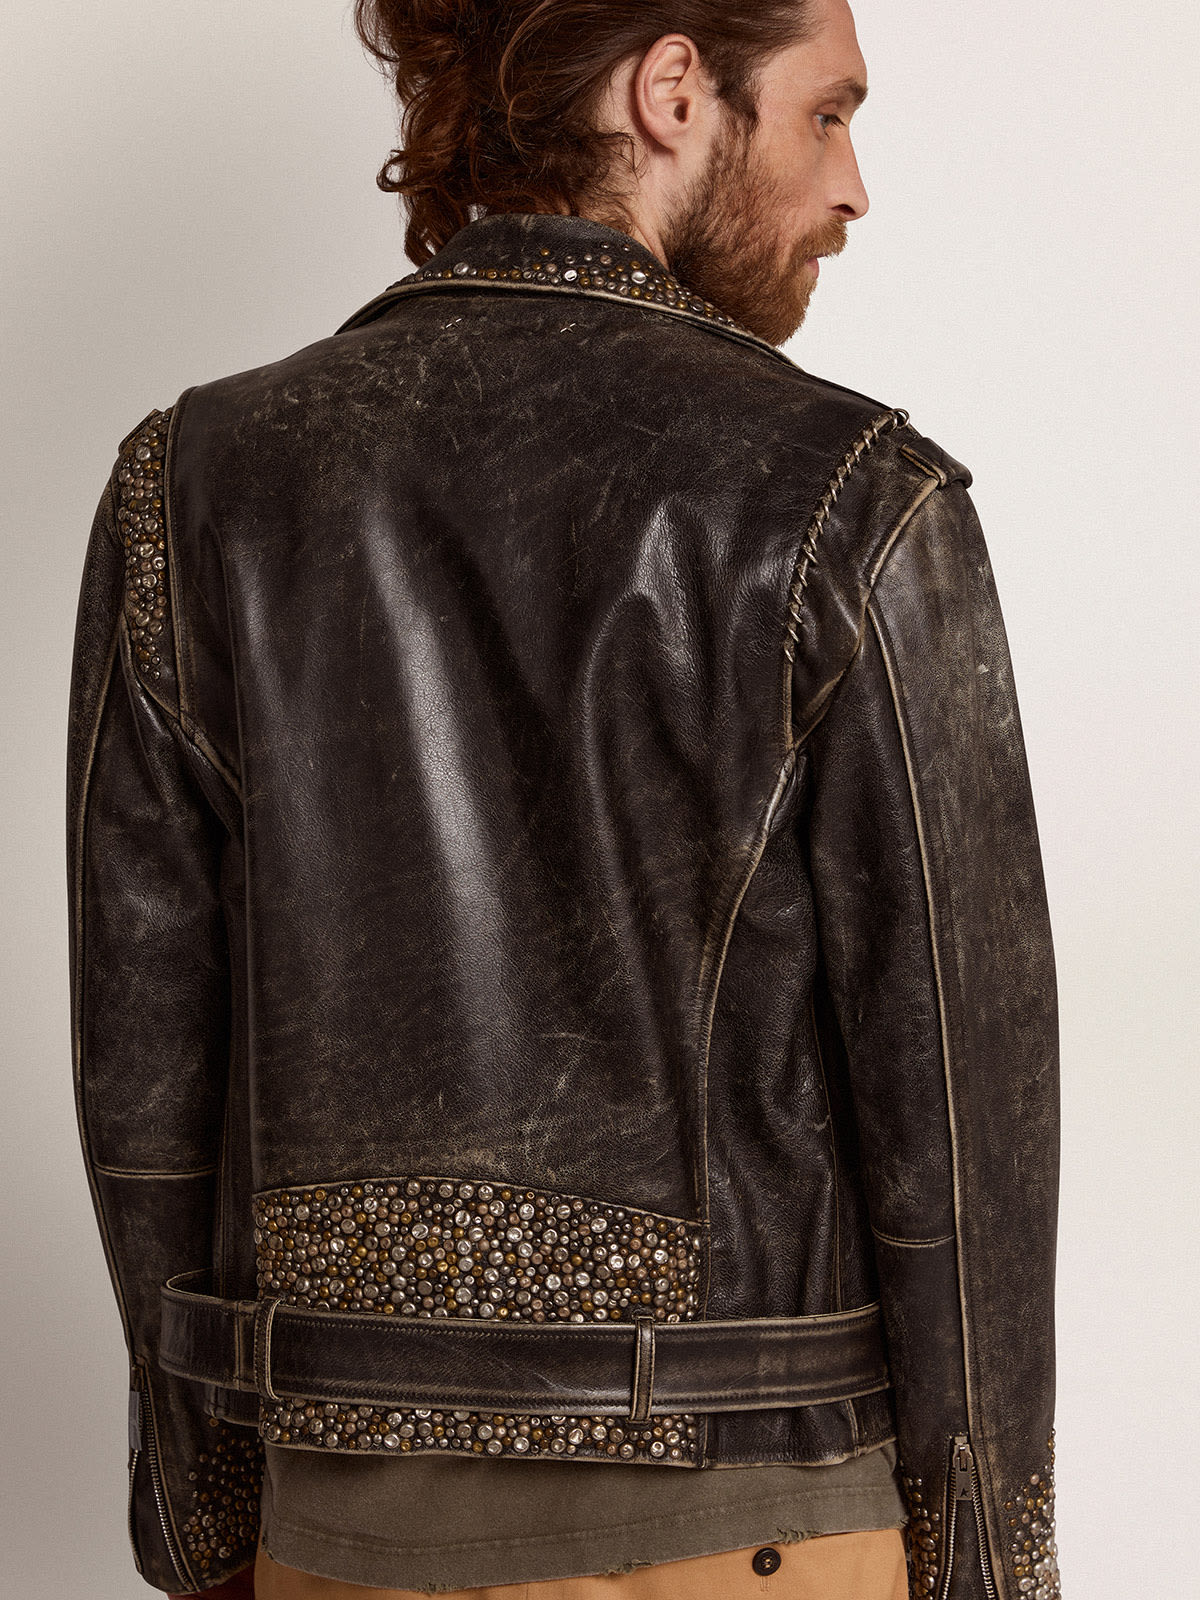 Golden Goose - Men's leather biker jacket with hammered studs and adhesive tape in 